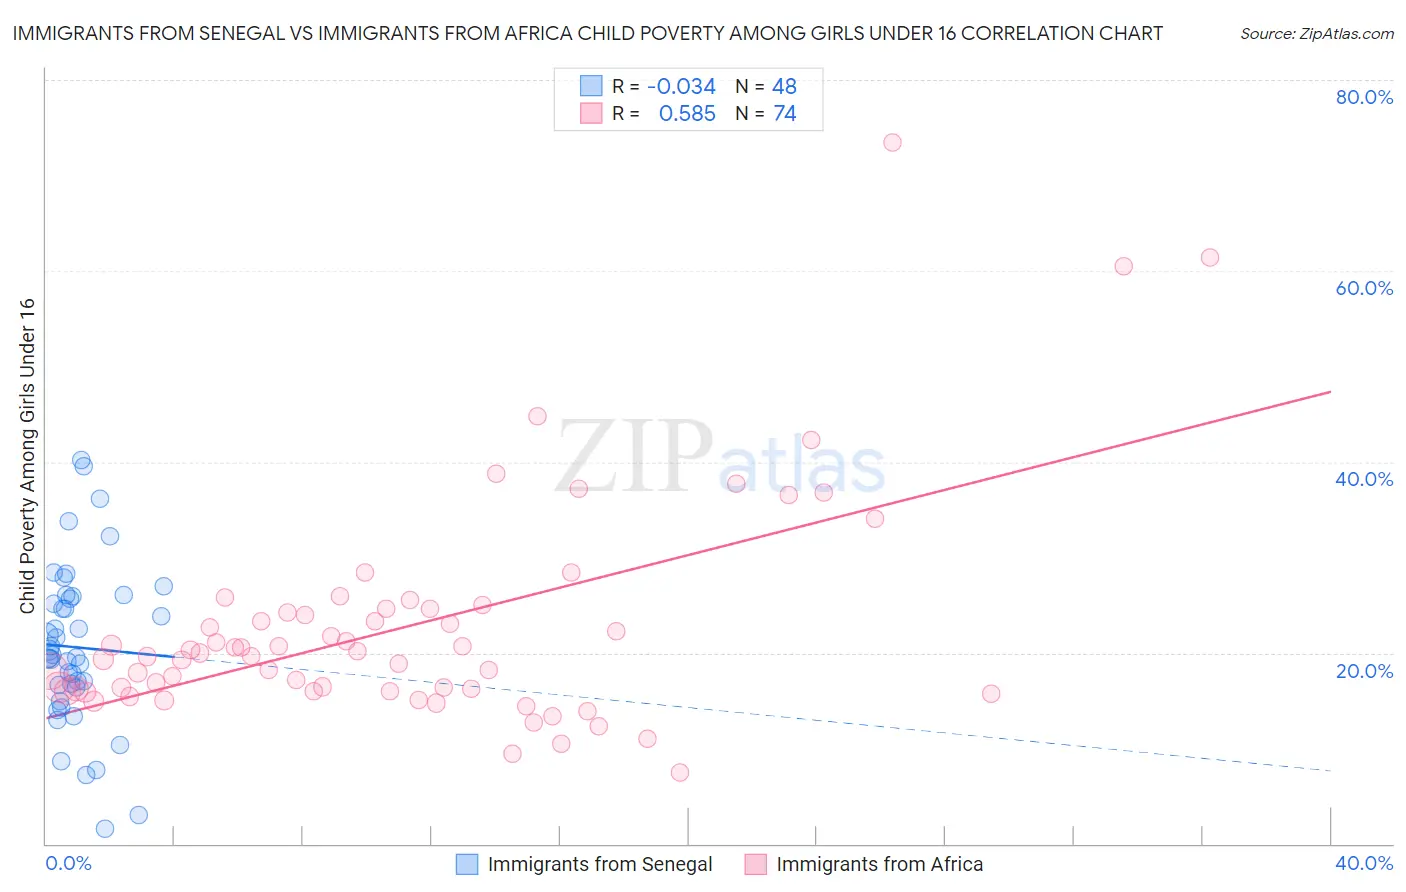 Immigrants from Senegal vs Immigrants from Africa Child Poverty Among Girls Under 16